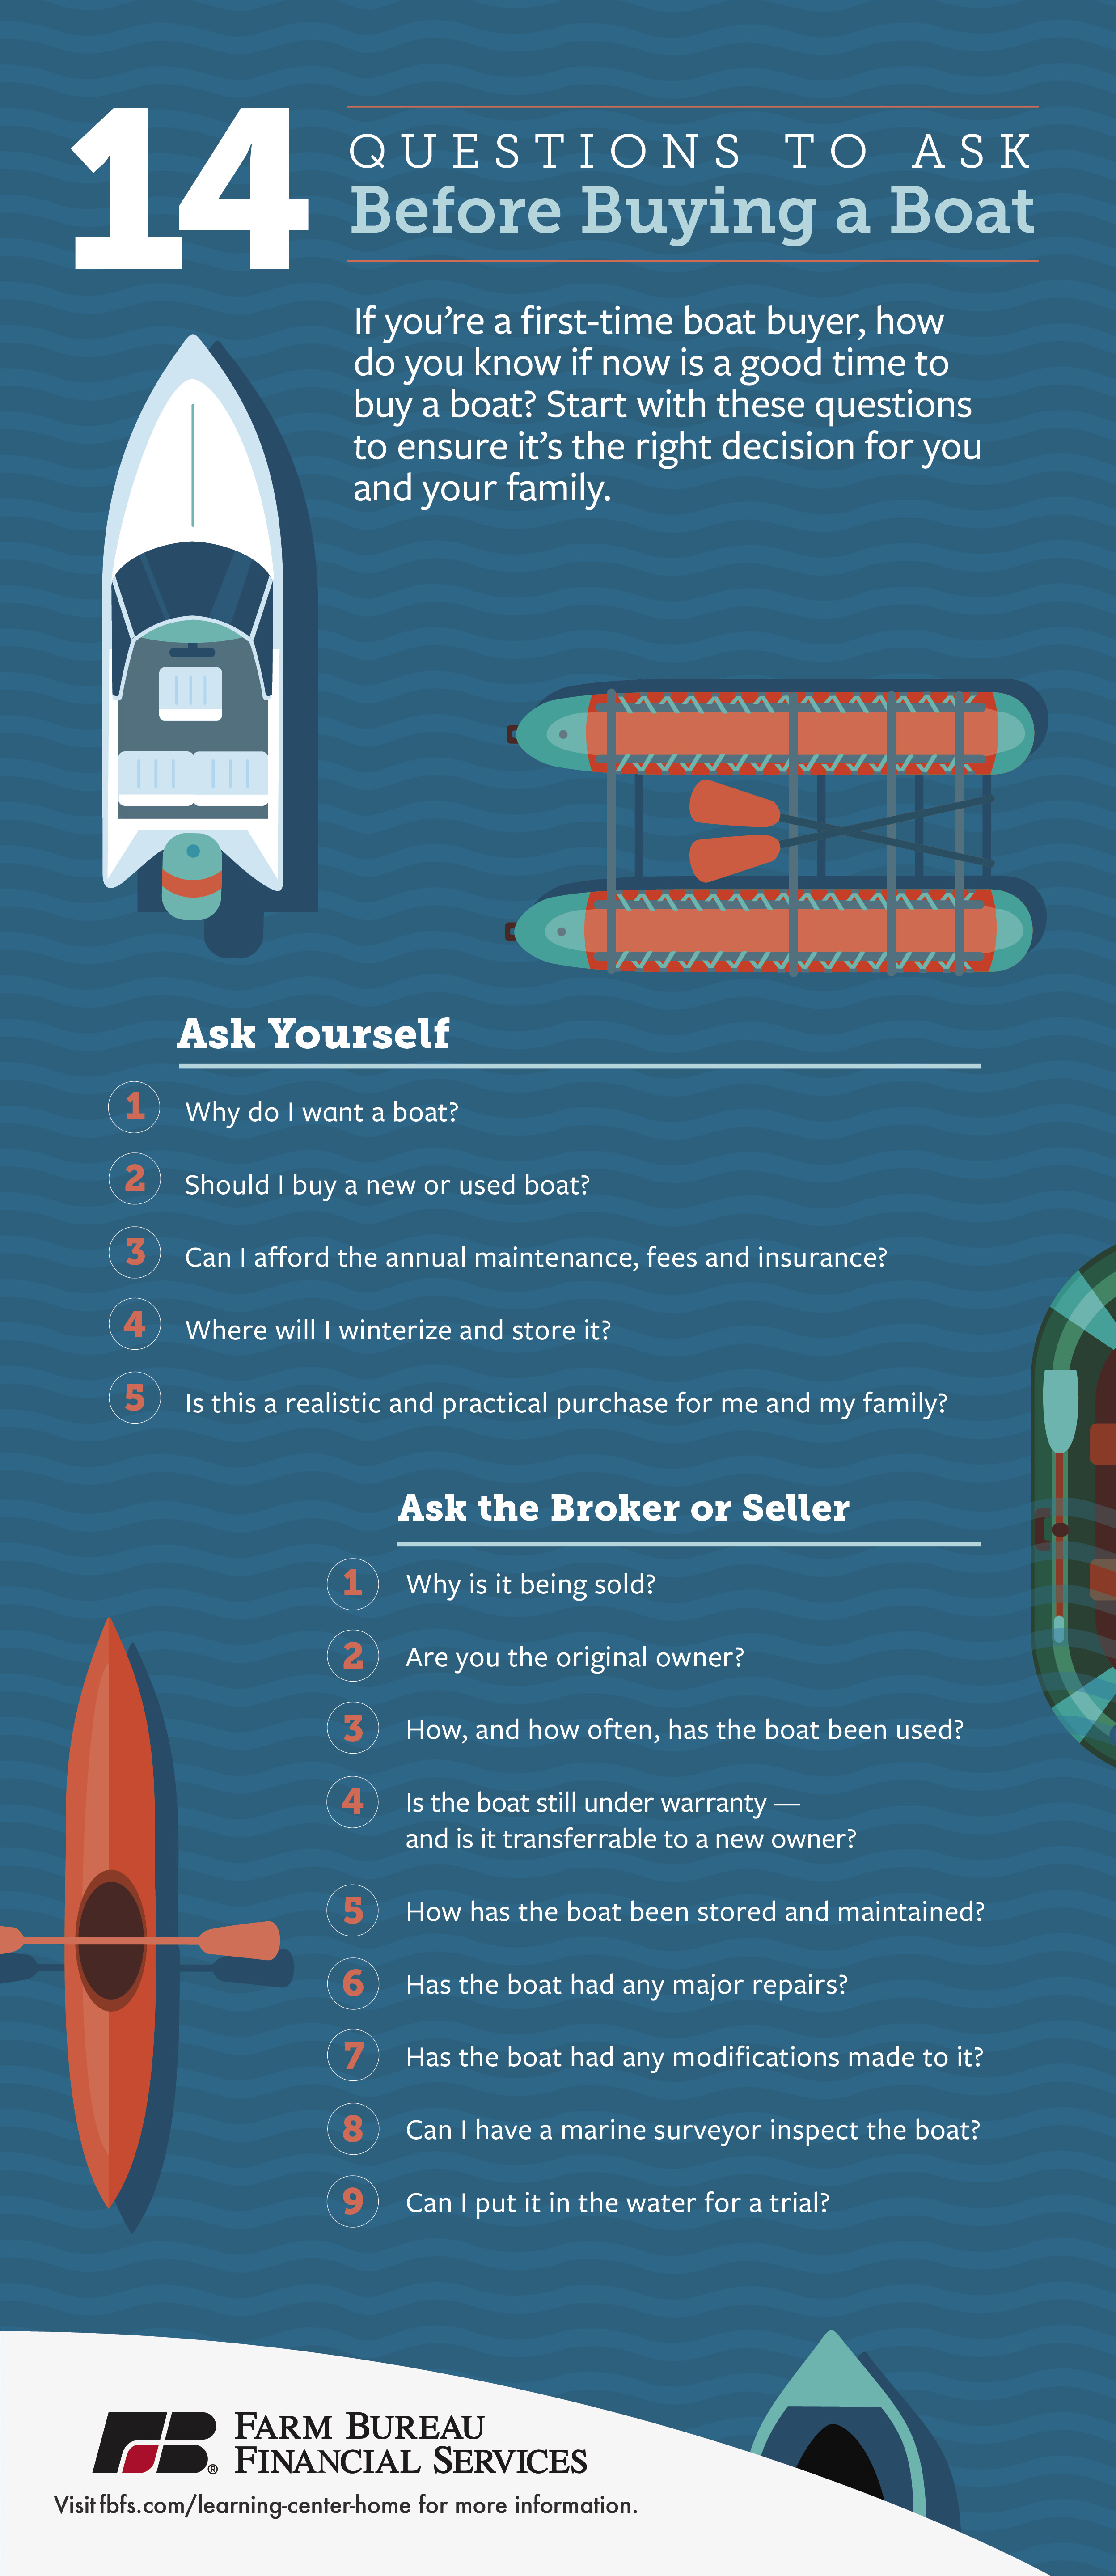 14 Questions to Ask Before Buying a Boat